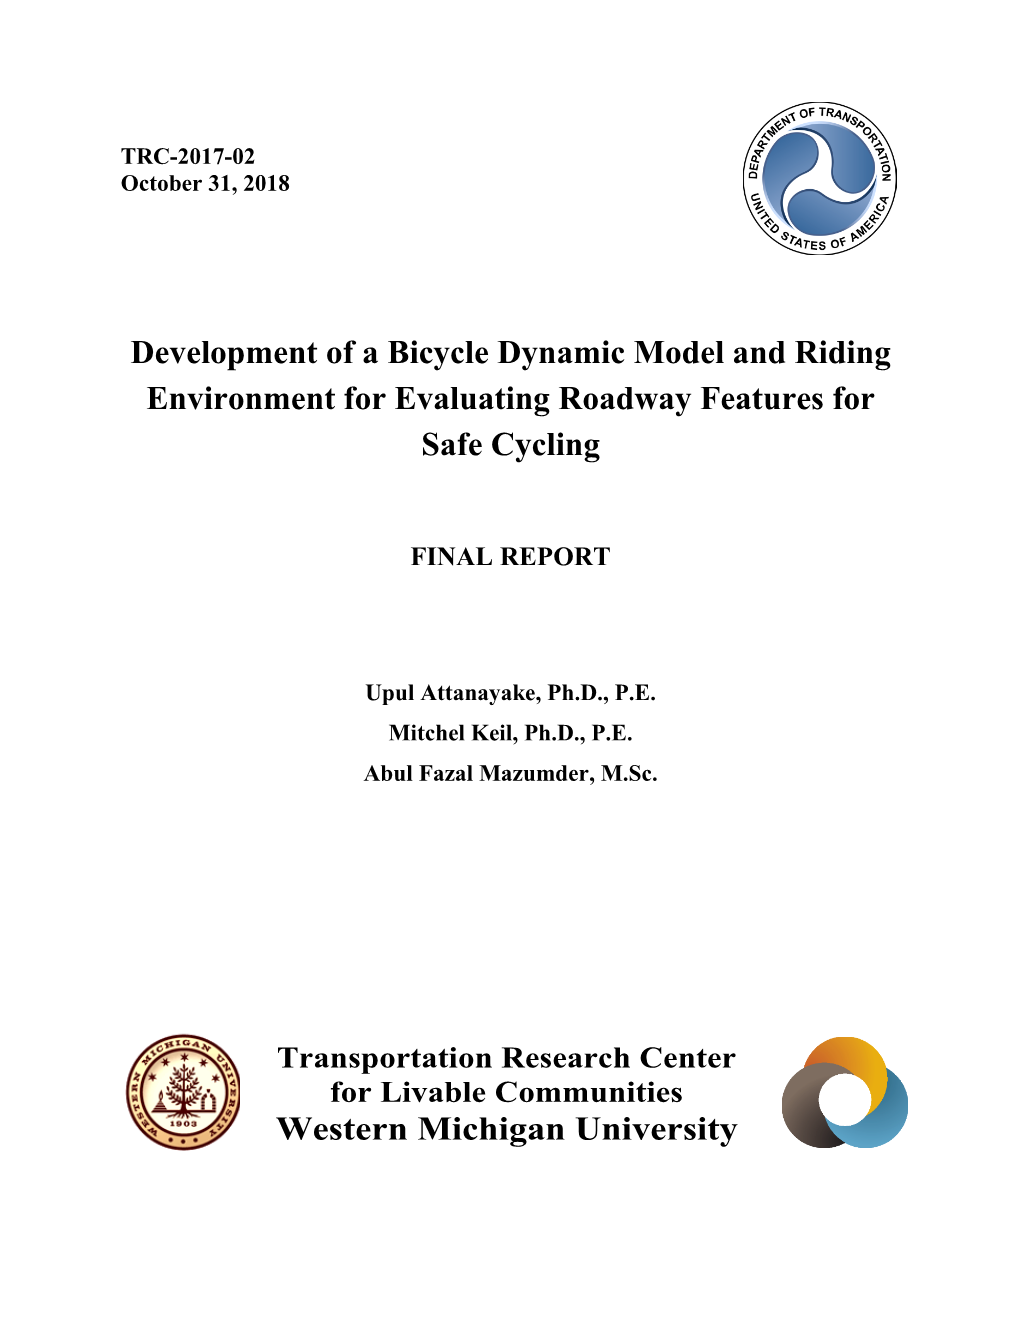 Development of a Bicycle Dynamic Model and Riding Environment for Evaluating Roadway Features for Safe Cycling